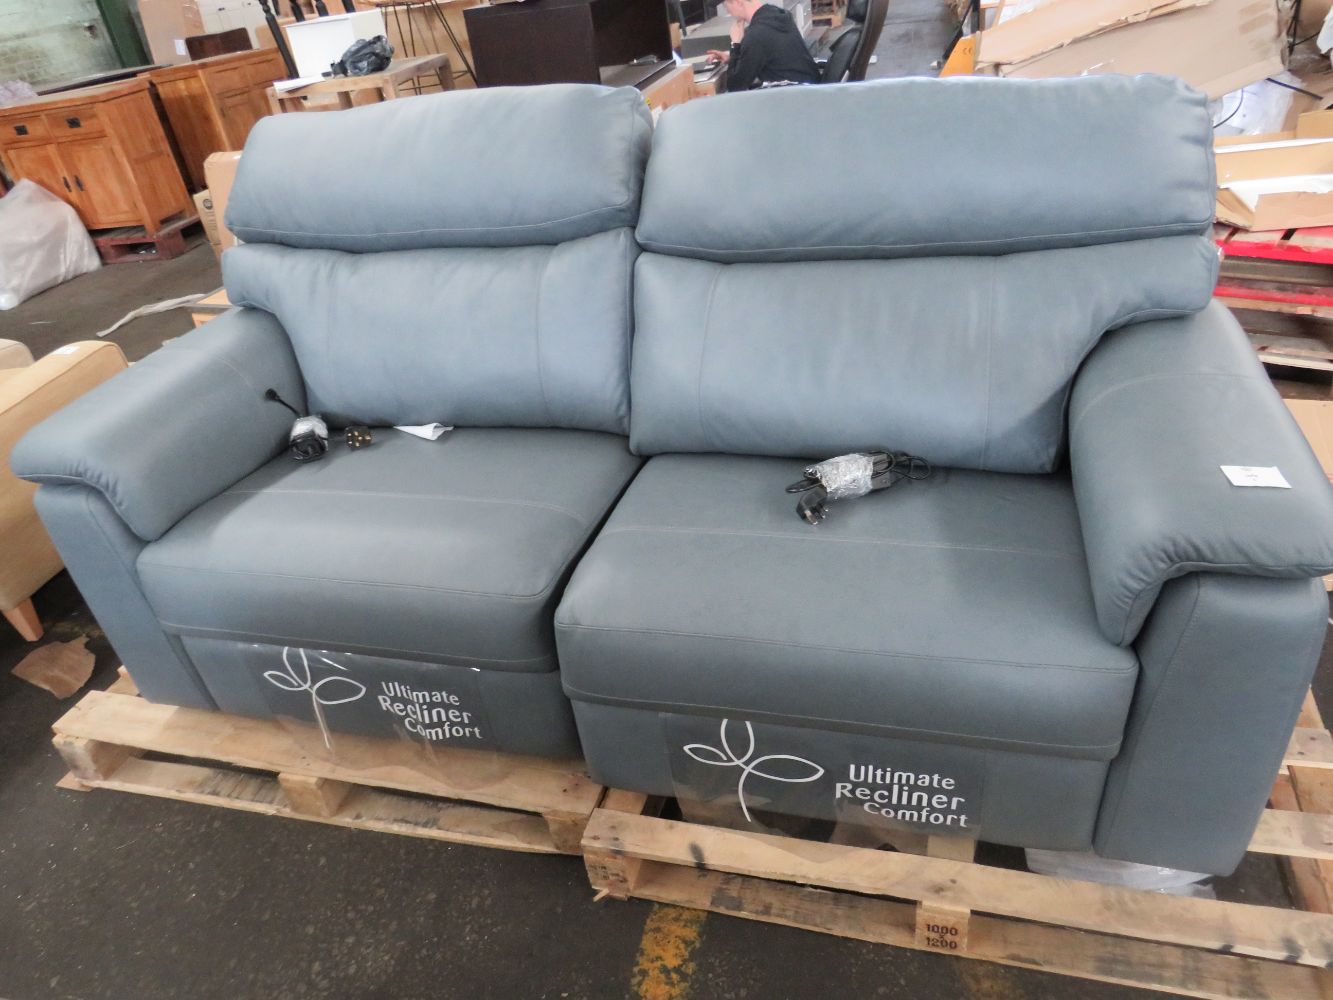 Sofas and chairs from Oak furniture land, Swoon, Costco and more at great discounted prices